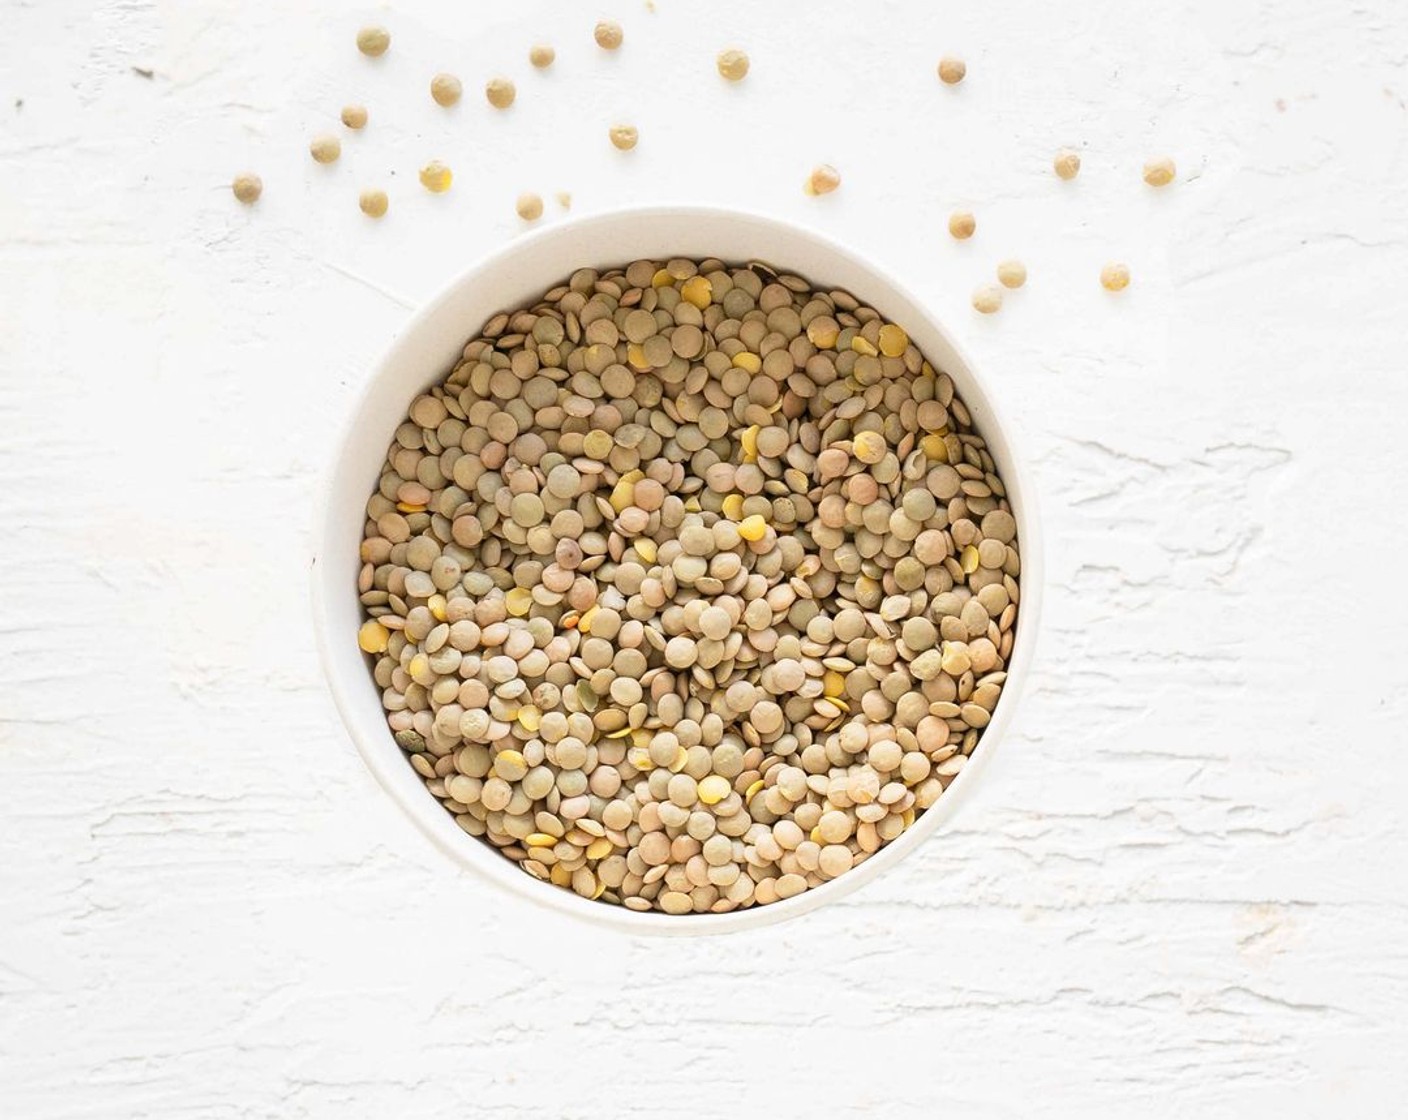 step 3 In a large pot on the stove, bring lentils and Water (3 1/2 cups) to a soft boil and reduce temperature to low and cook lentils for 15-20 minutes until soft, but not mushy. Drain any excess water once finished cooking.